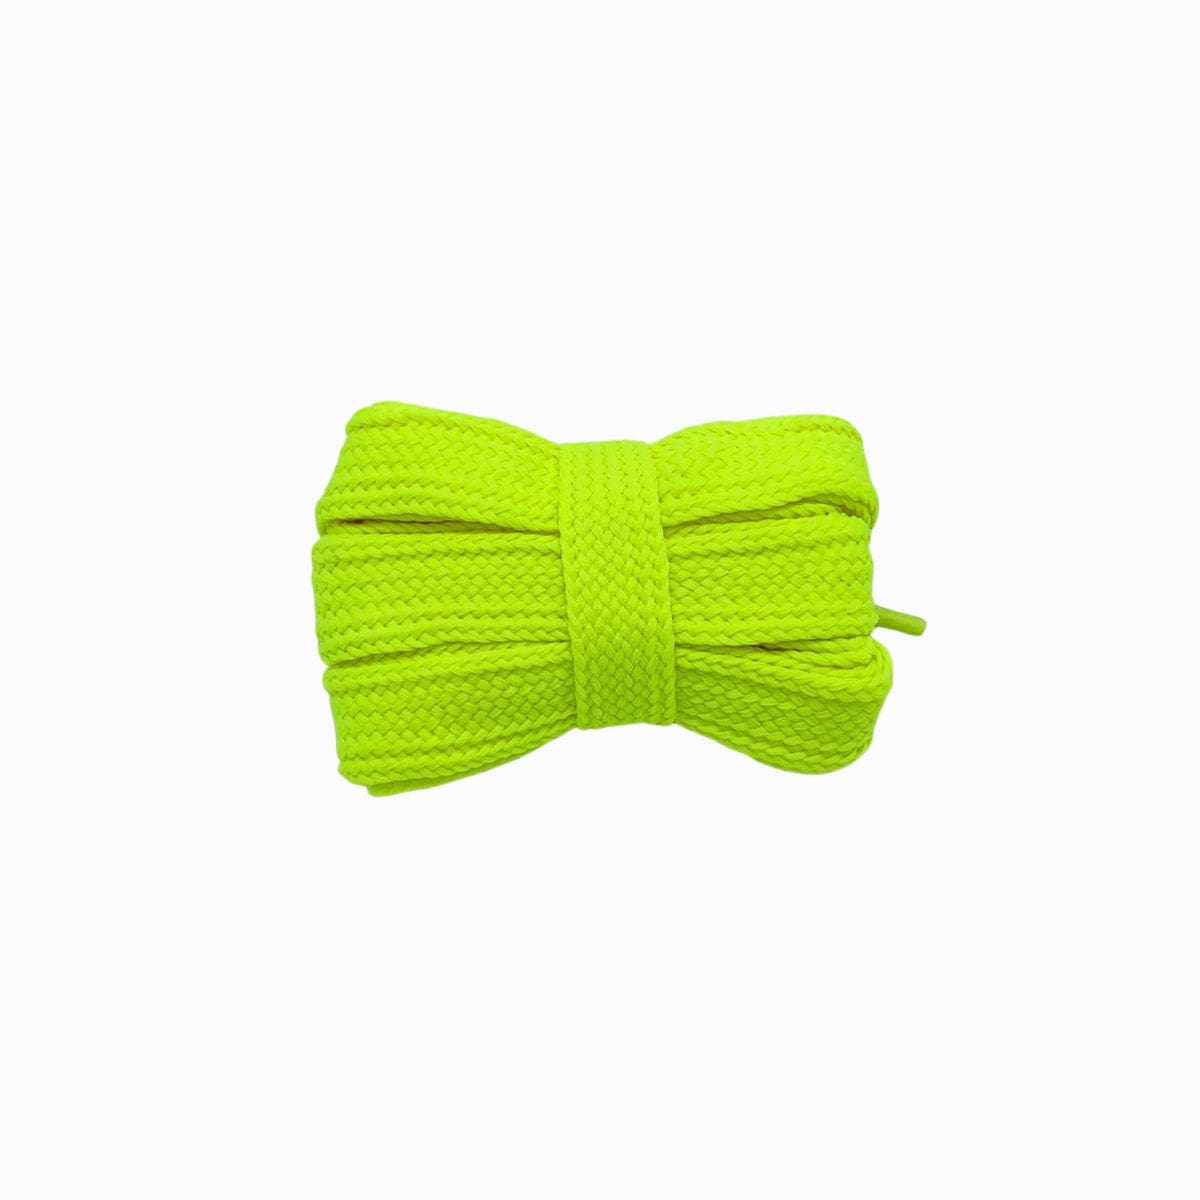 Fluorescent Yellow Adidas Fat Laces Replacement shoelaces for Adidas Sneakers by Kicks Shoelaces